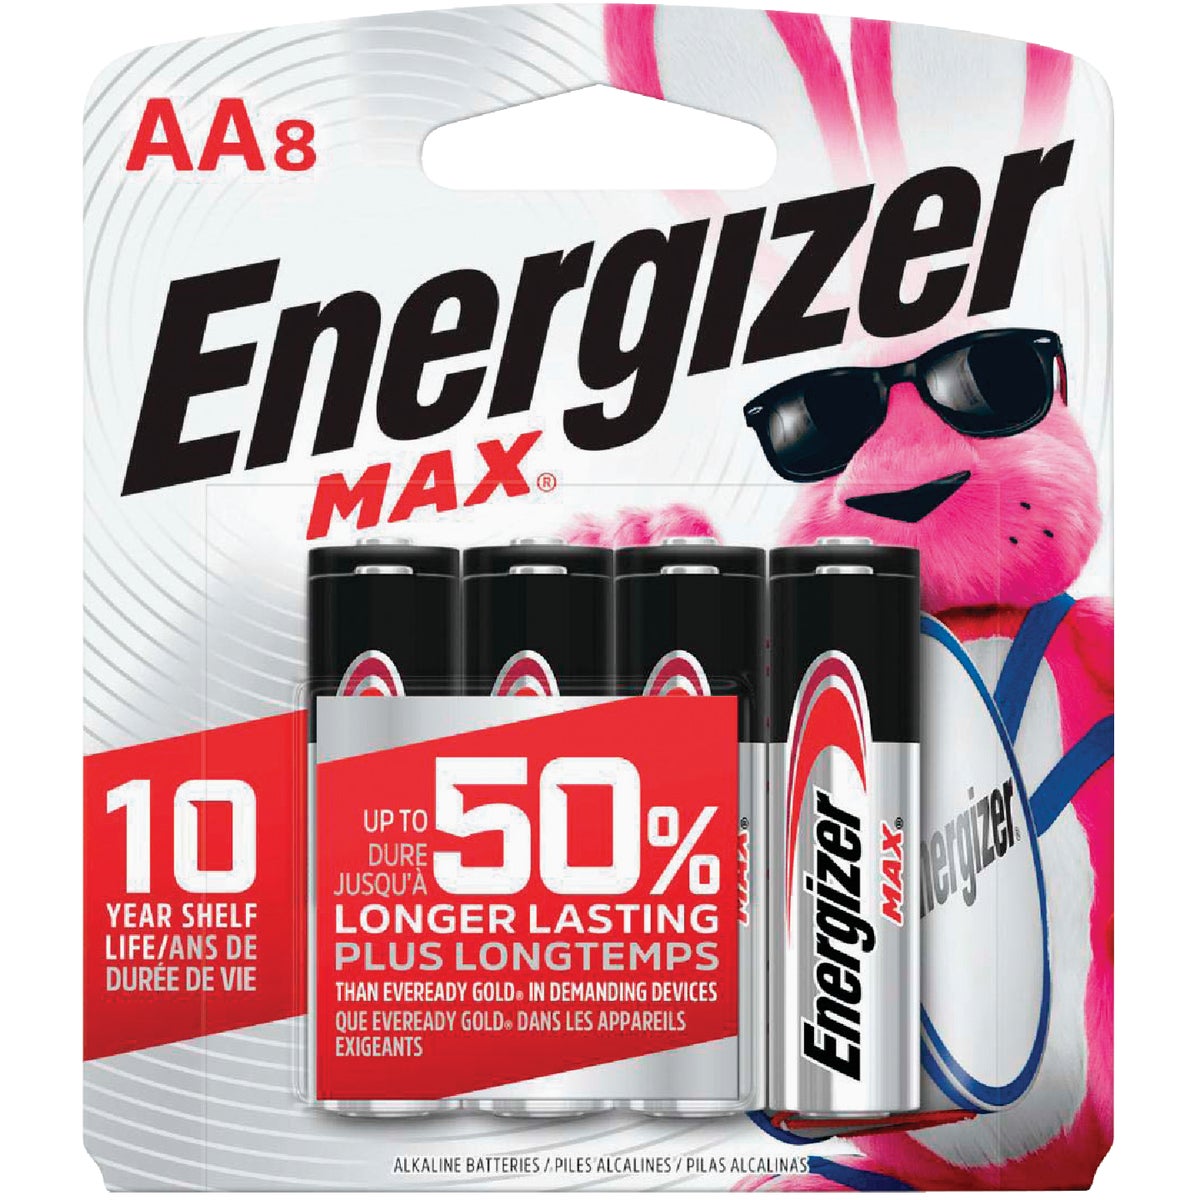 Energizer Max AA Alkaline Battery (8-Pack)